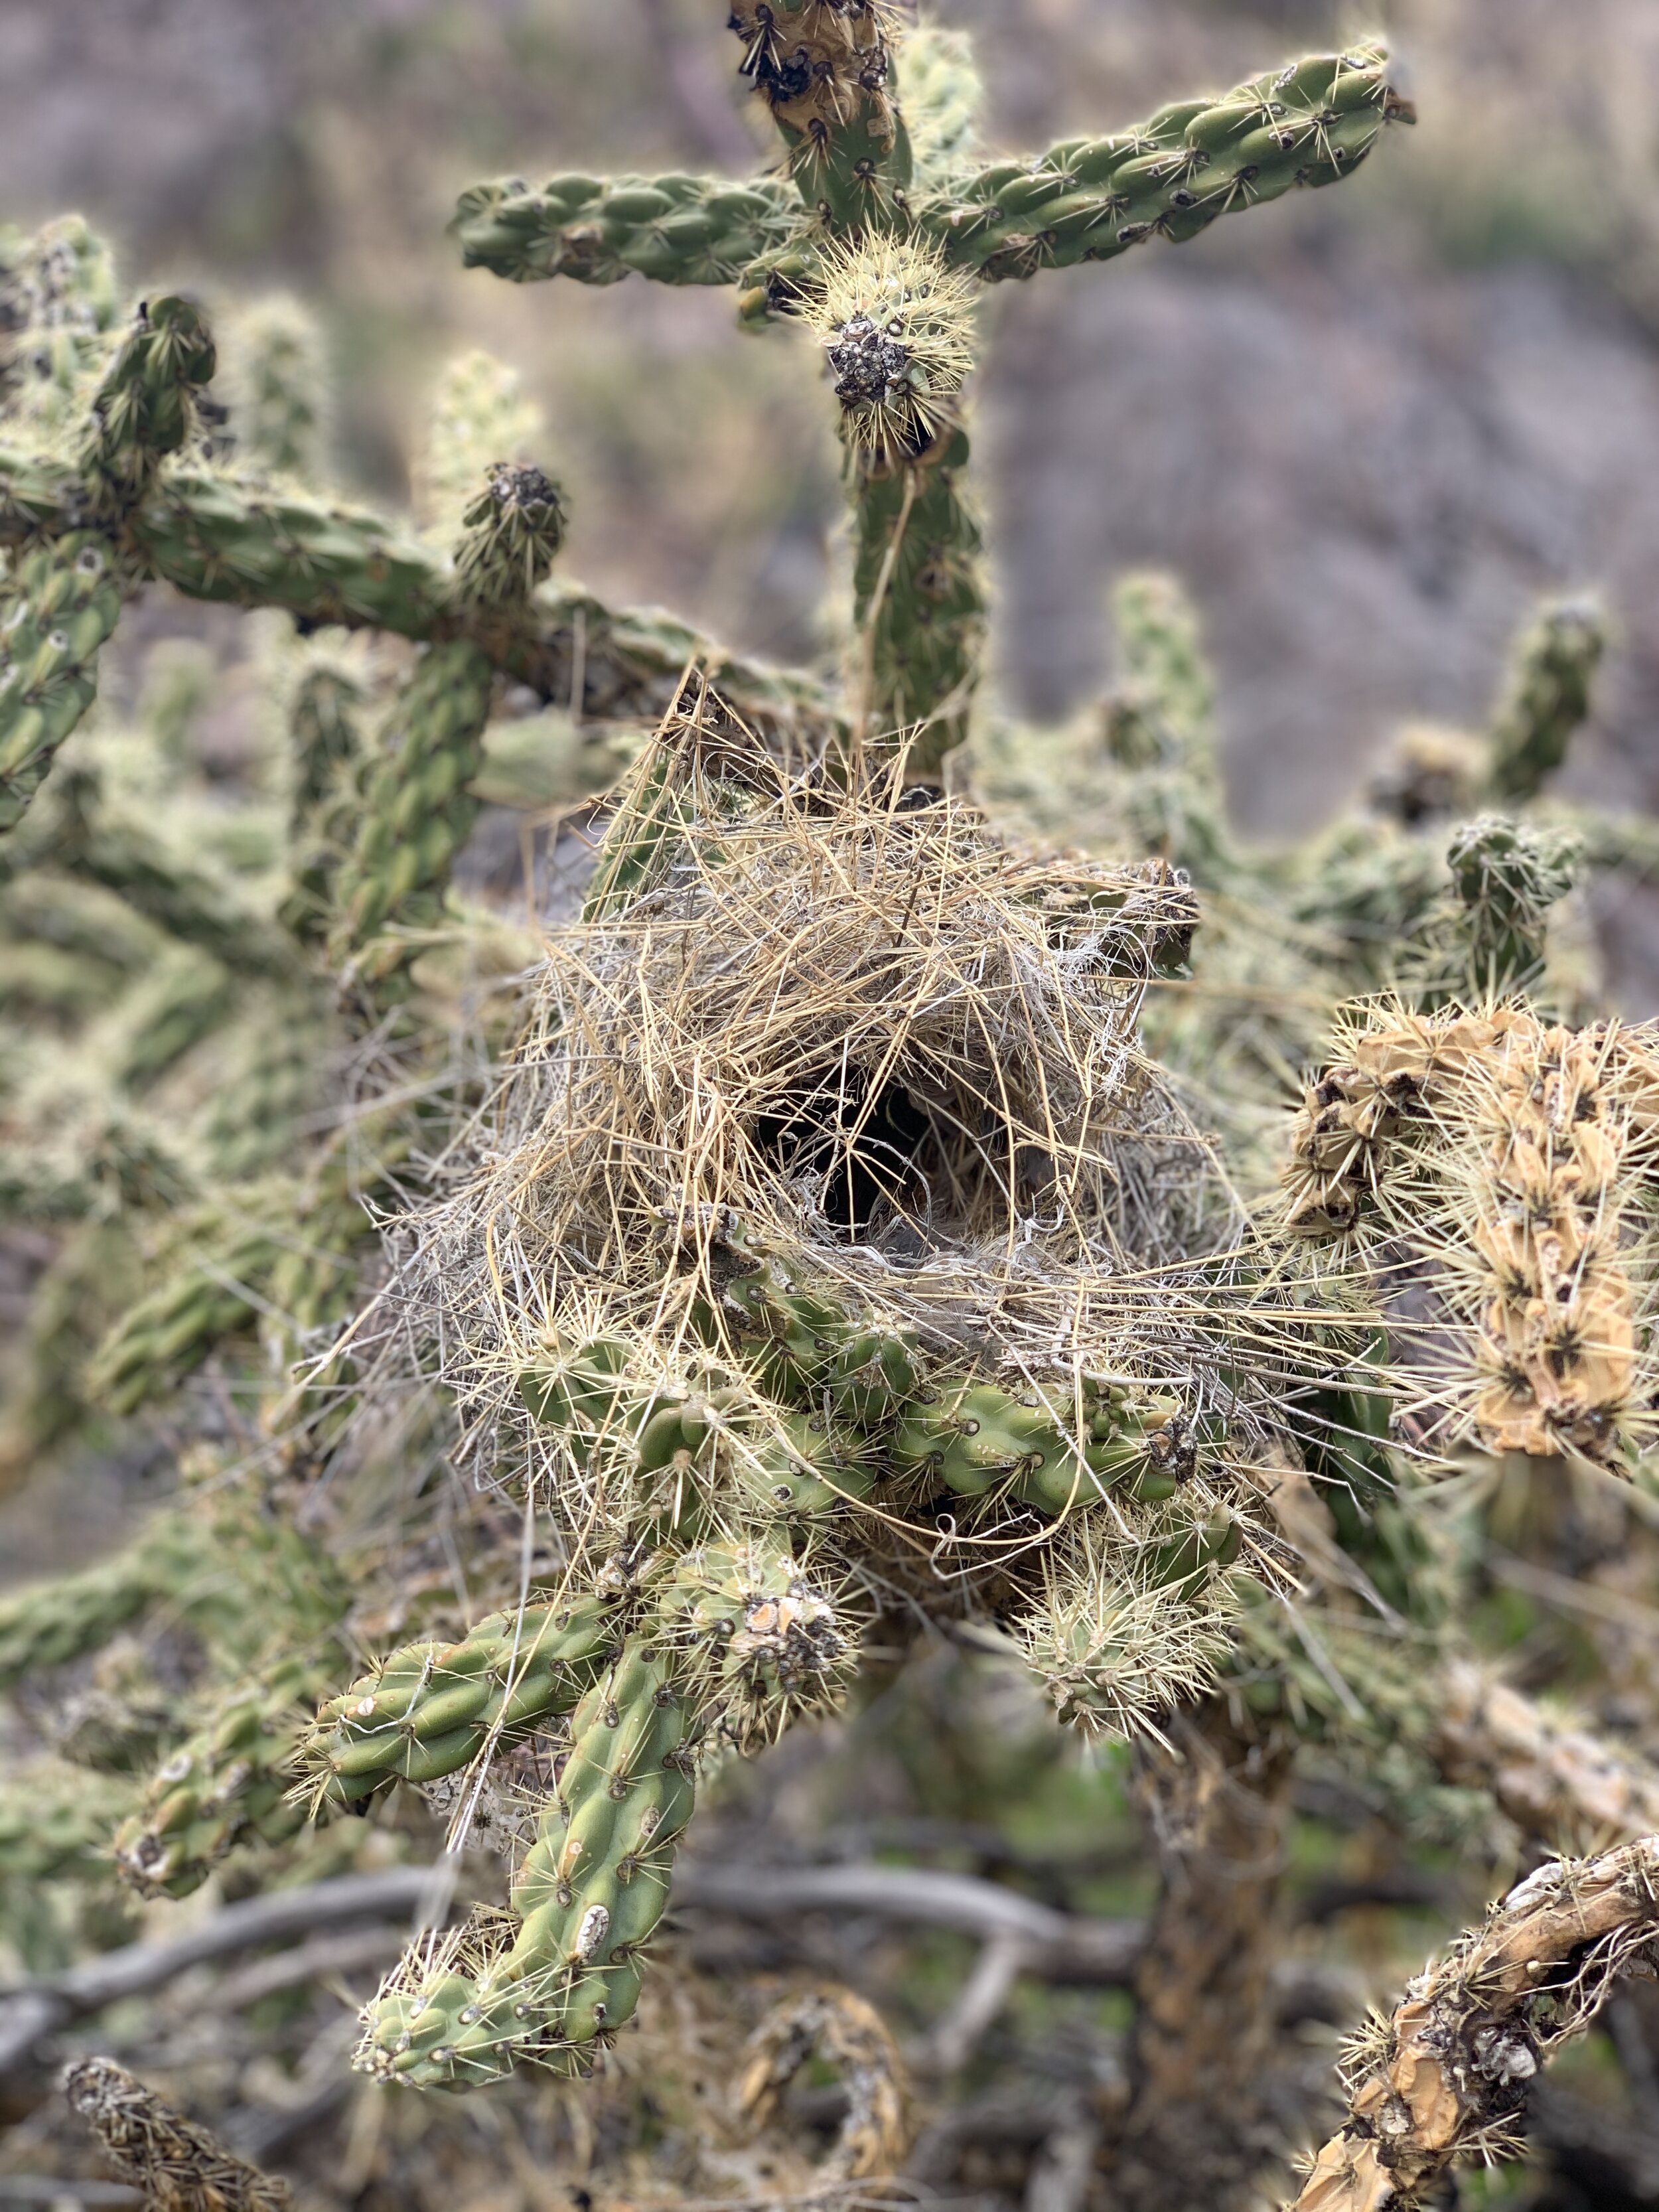  I loved this picture of the bird’s nest in this cactus.  